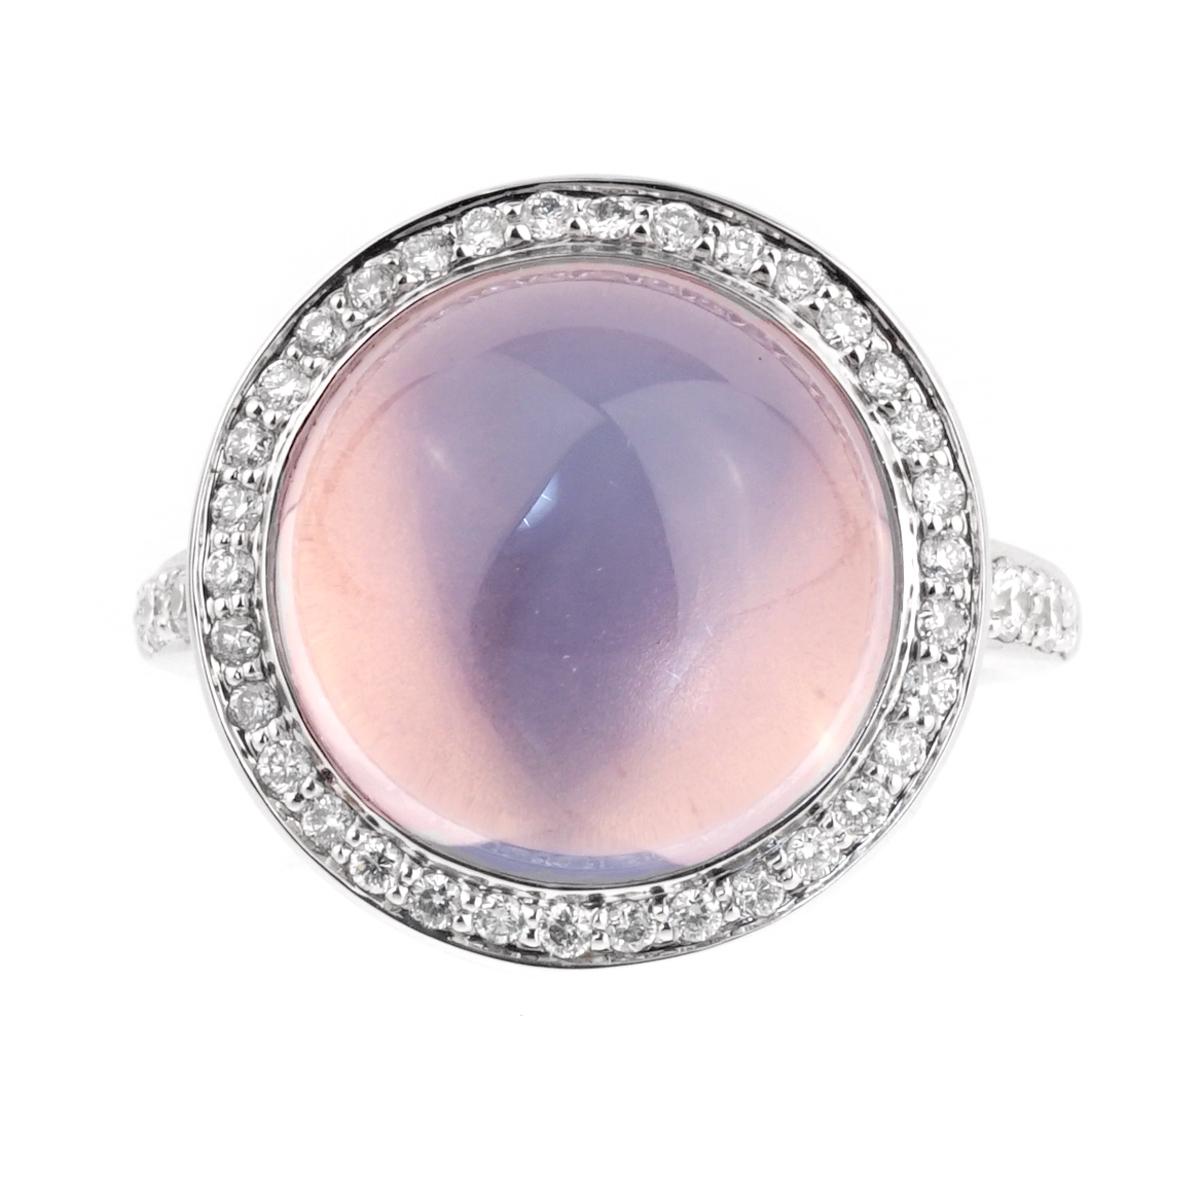 A fabulous Mimi Milano ring featuring a 10.77ct Lavender Moonstone adorned by .45ct of round brilliant cut diamonds. Size 6 1/4 (Resizeable)

Opulent Jewelers Sku: 999